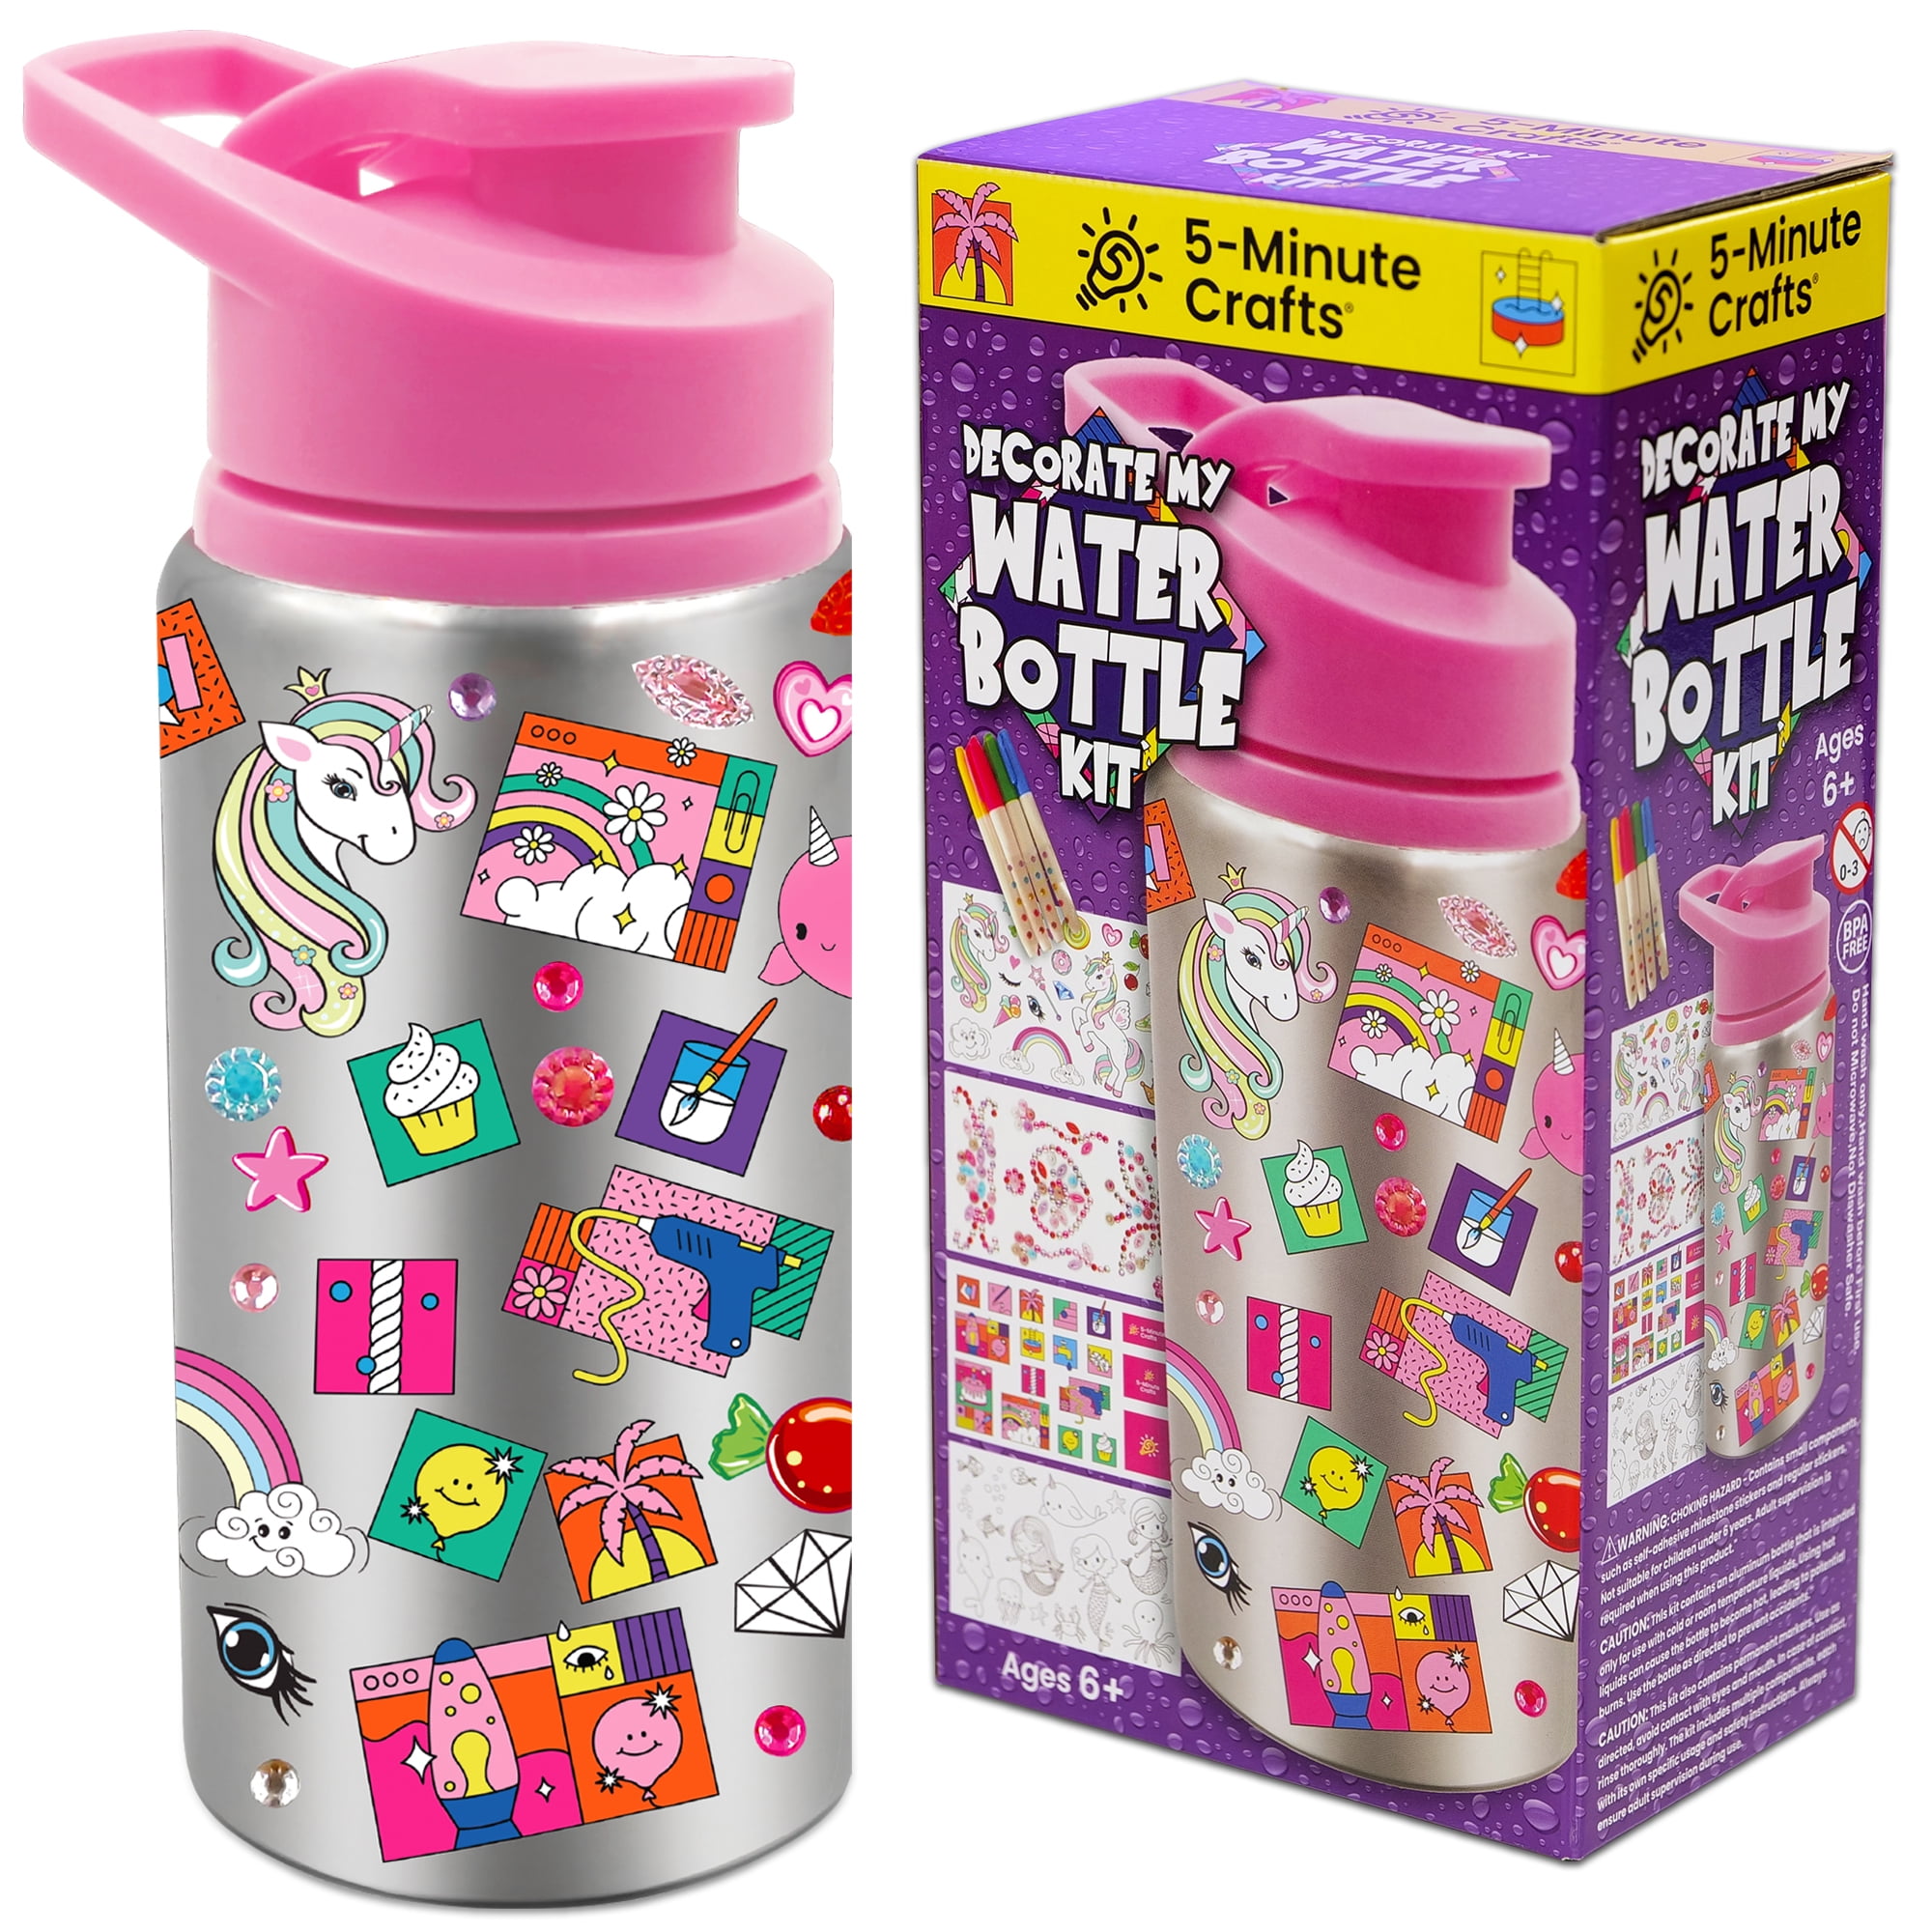  Decorate Your Own Water Bottle Kits for Girls- 6 7 8 Year Old  Girl Gifts with Unicorn Stickers, Valentines Day Gifts for Kids, Birthday  Gifts for Girls, DIY Arts & Crafts